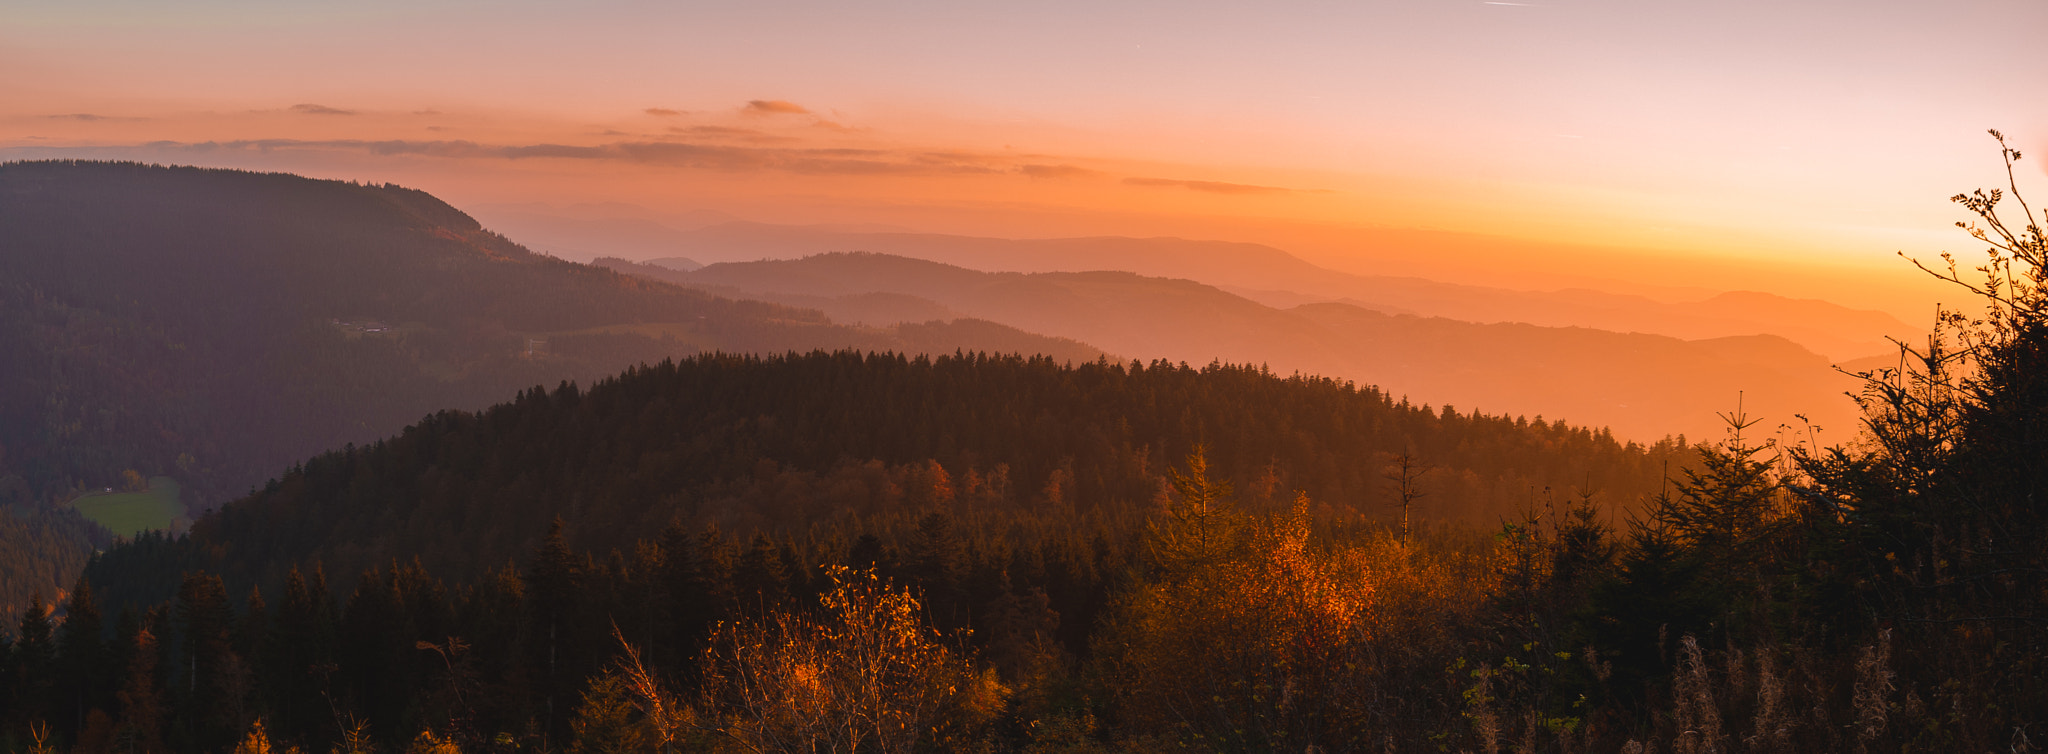 Sony a7 II sample photo. Sunset panorama - black forest, germany photography